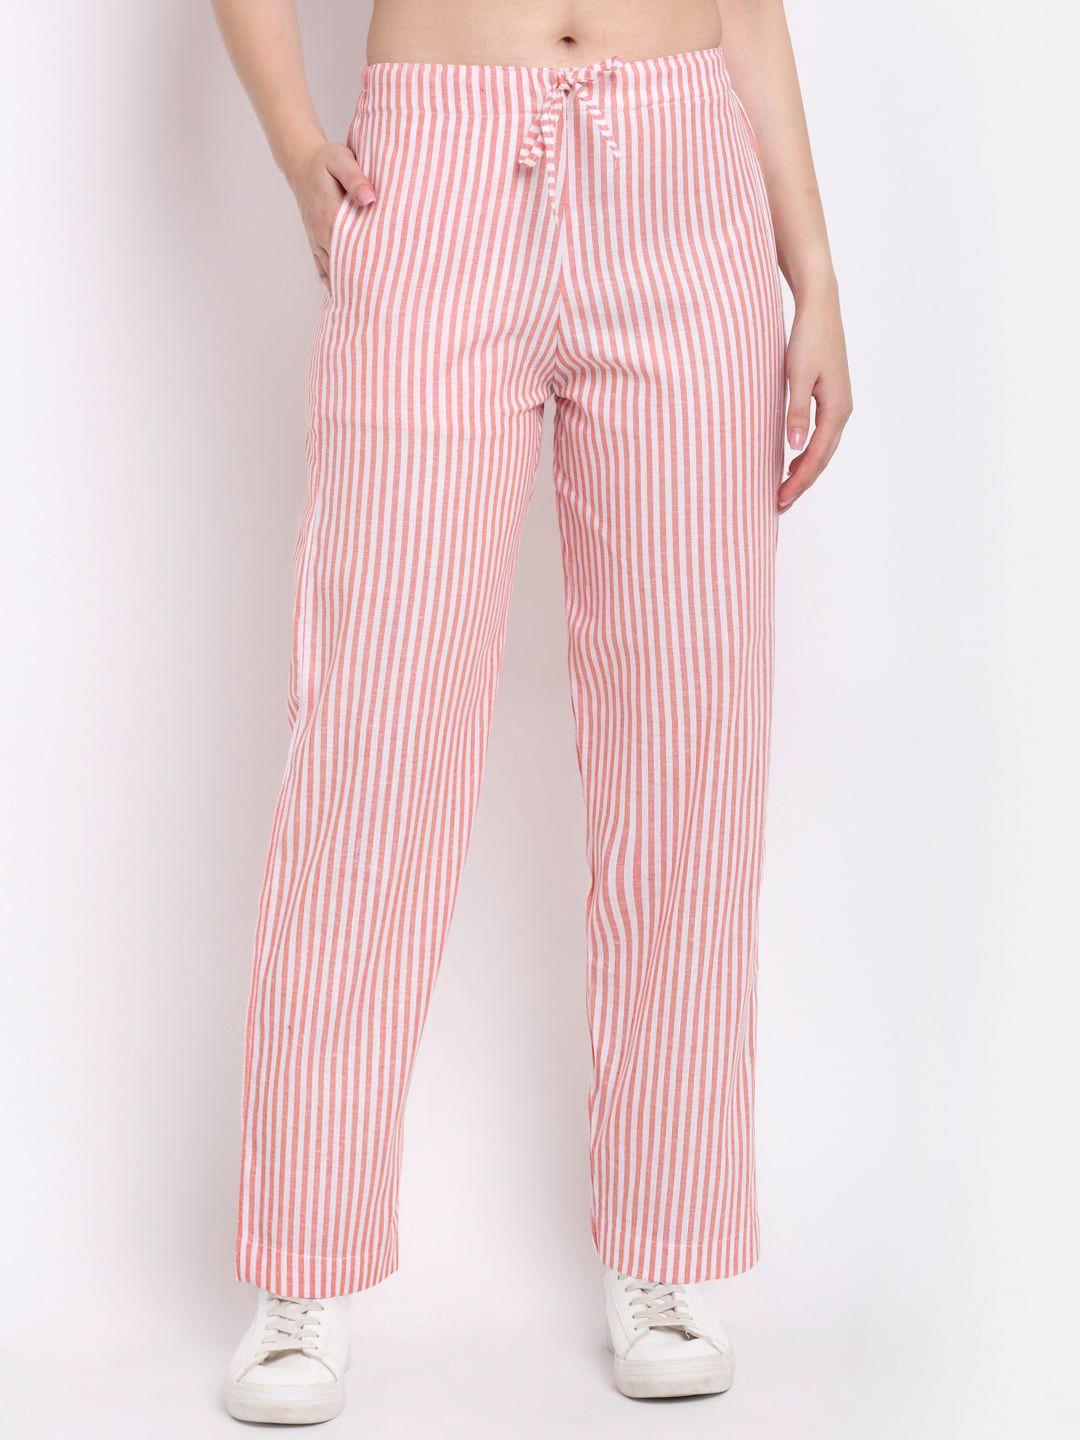 aarsha women peach & white striped cotton parallel trousers